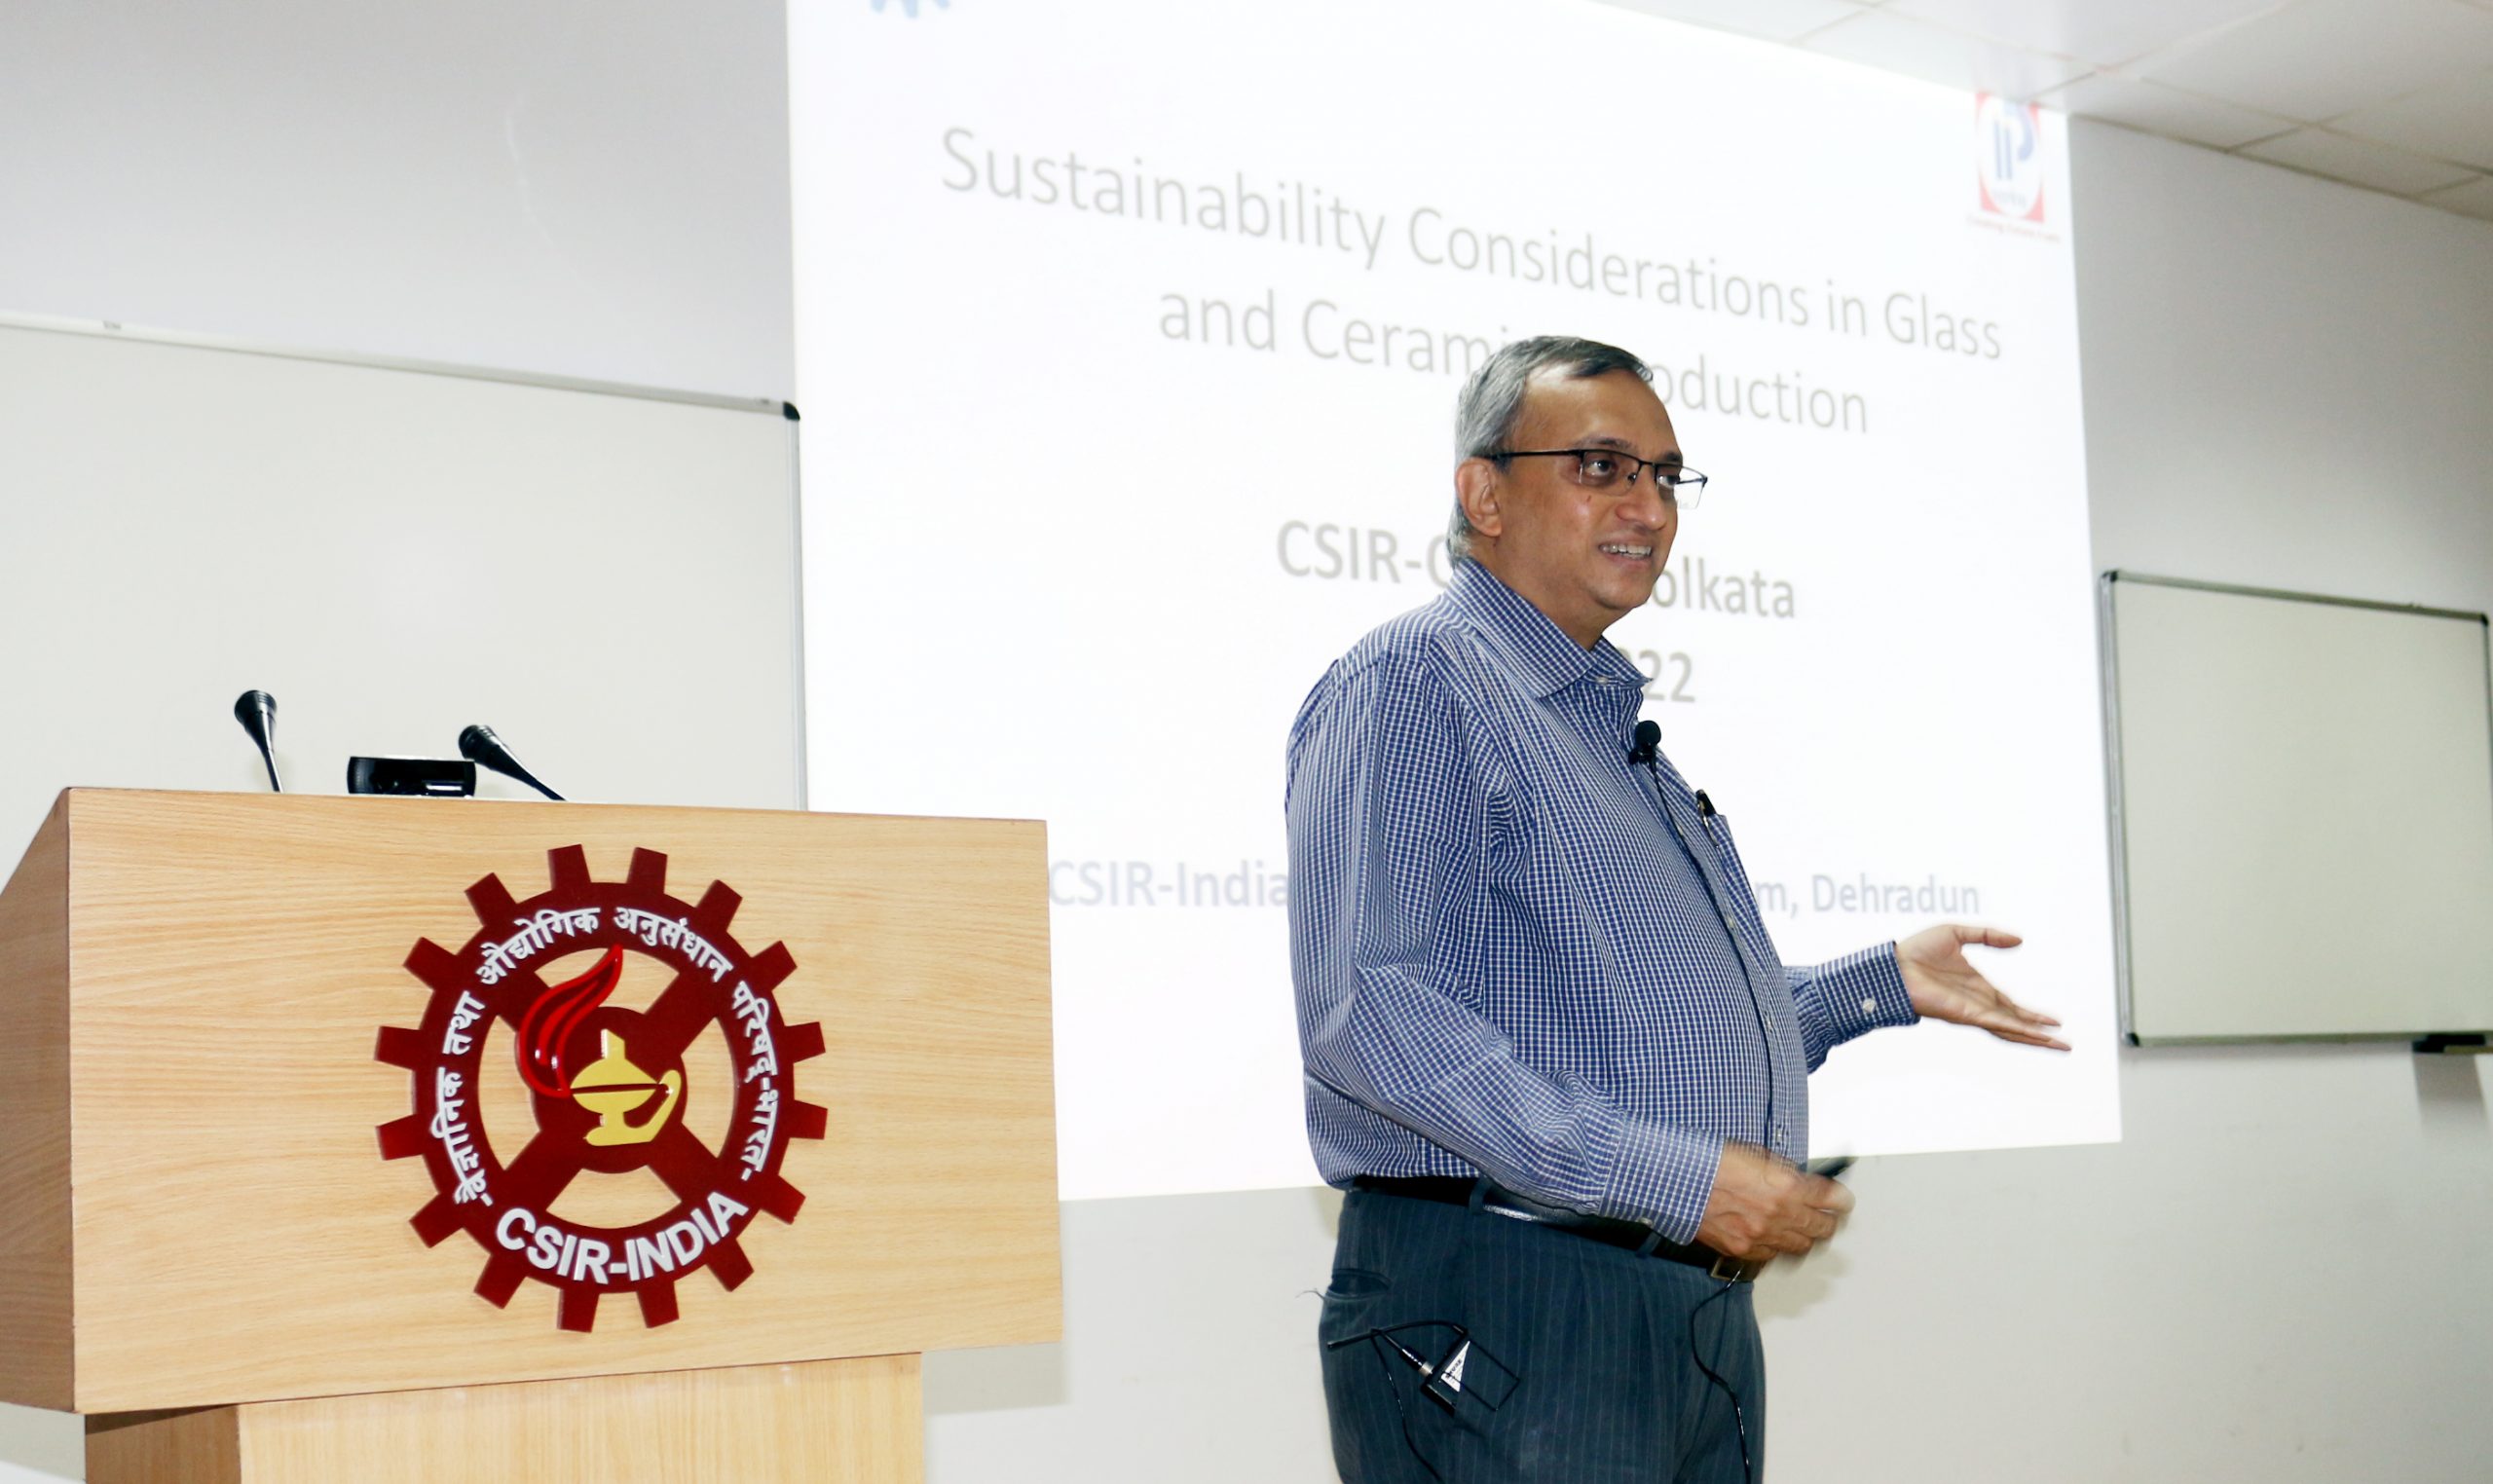 Lecture by Dr. Anjan Ray, Director, CSIR-Indian Institute of Petroleum, Dehradun